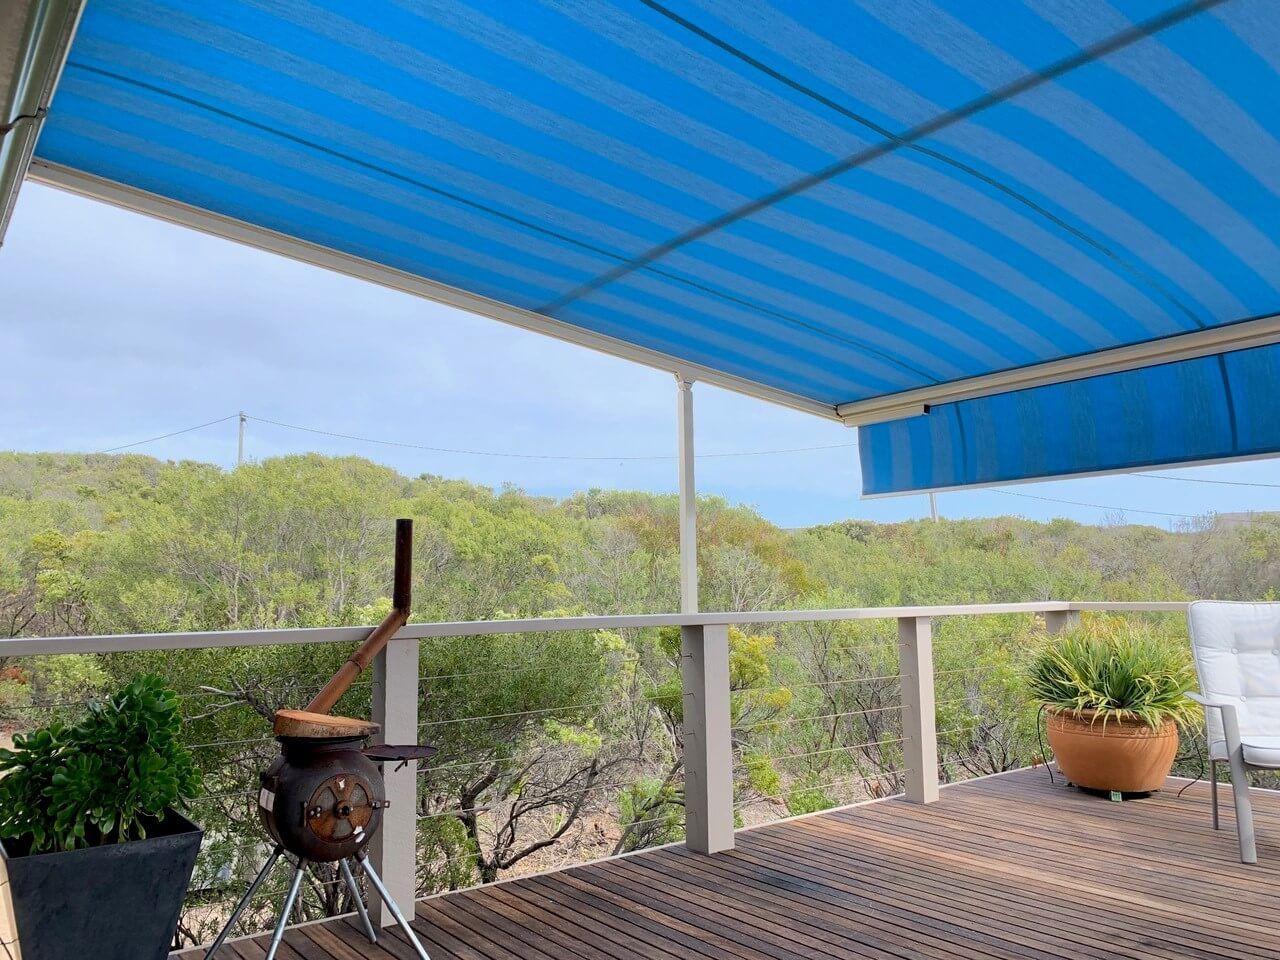 P40 Pergola Awning extended to shade a large outdoor area